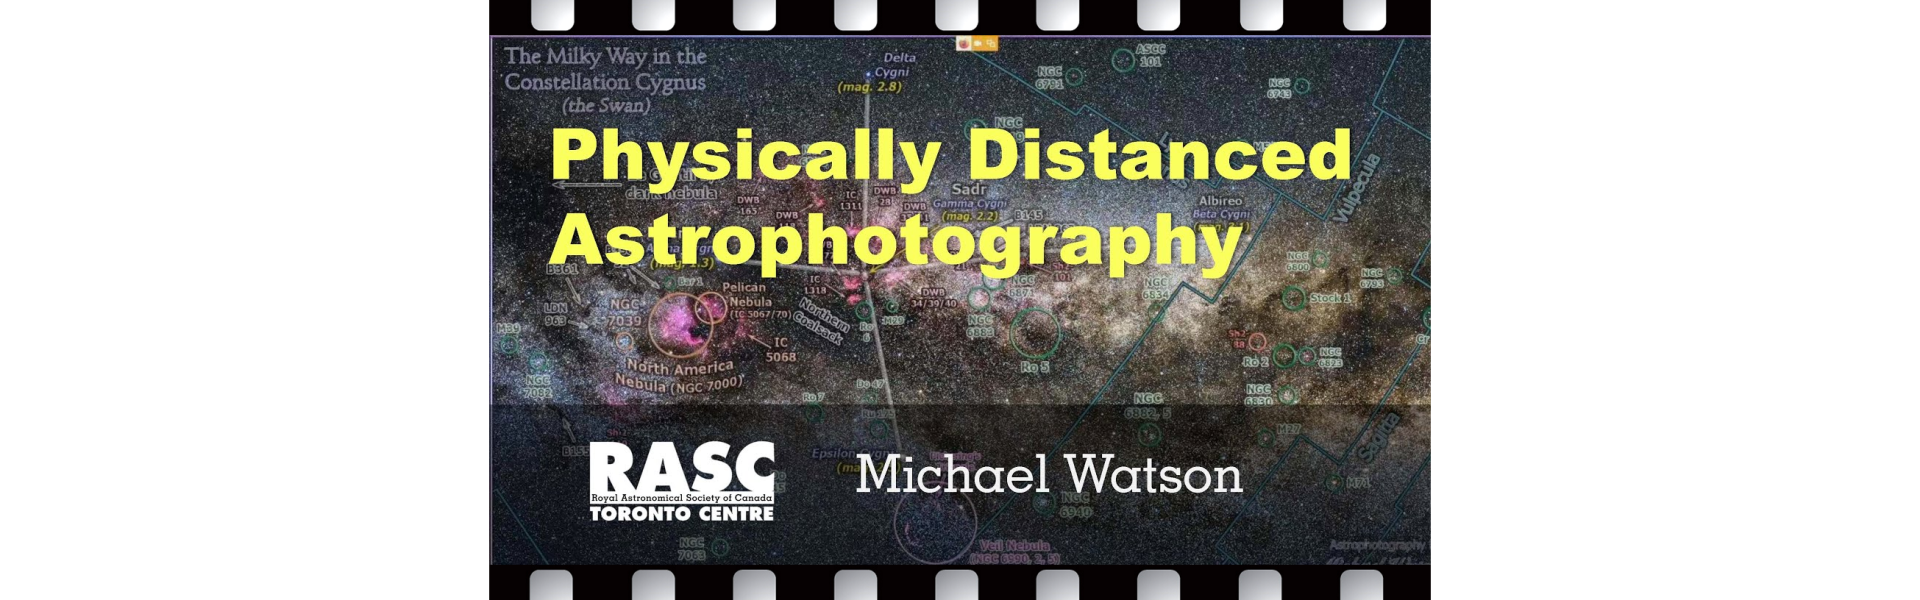 Physically Distanced Astrophotography of Michael Watson